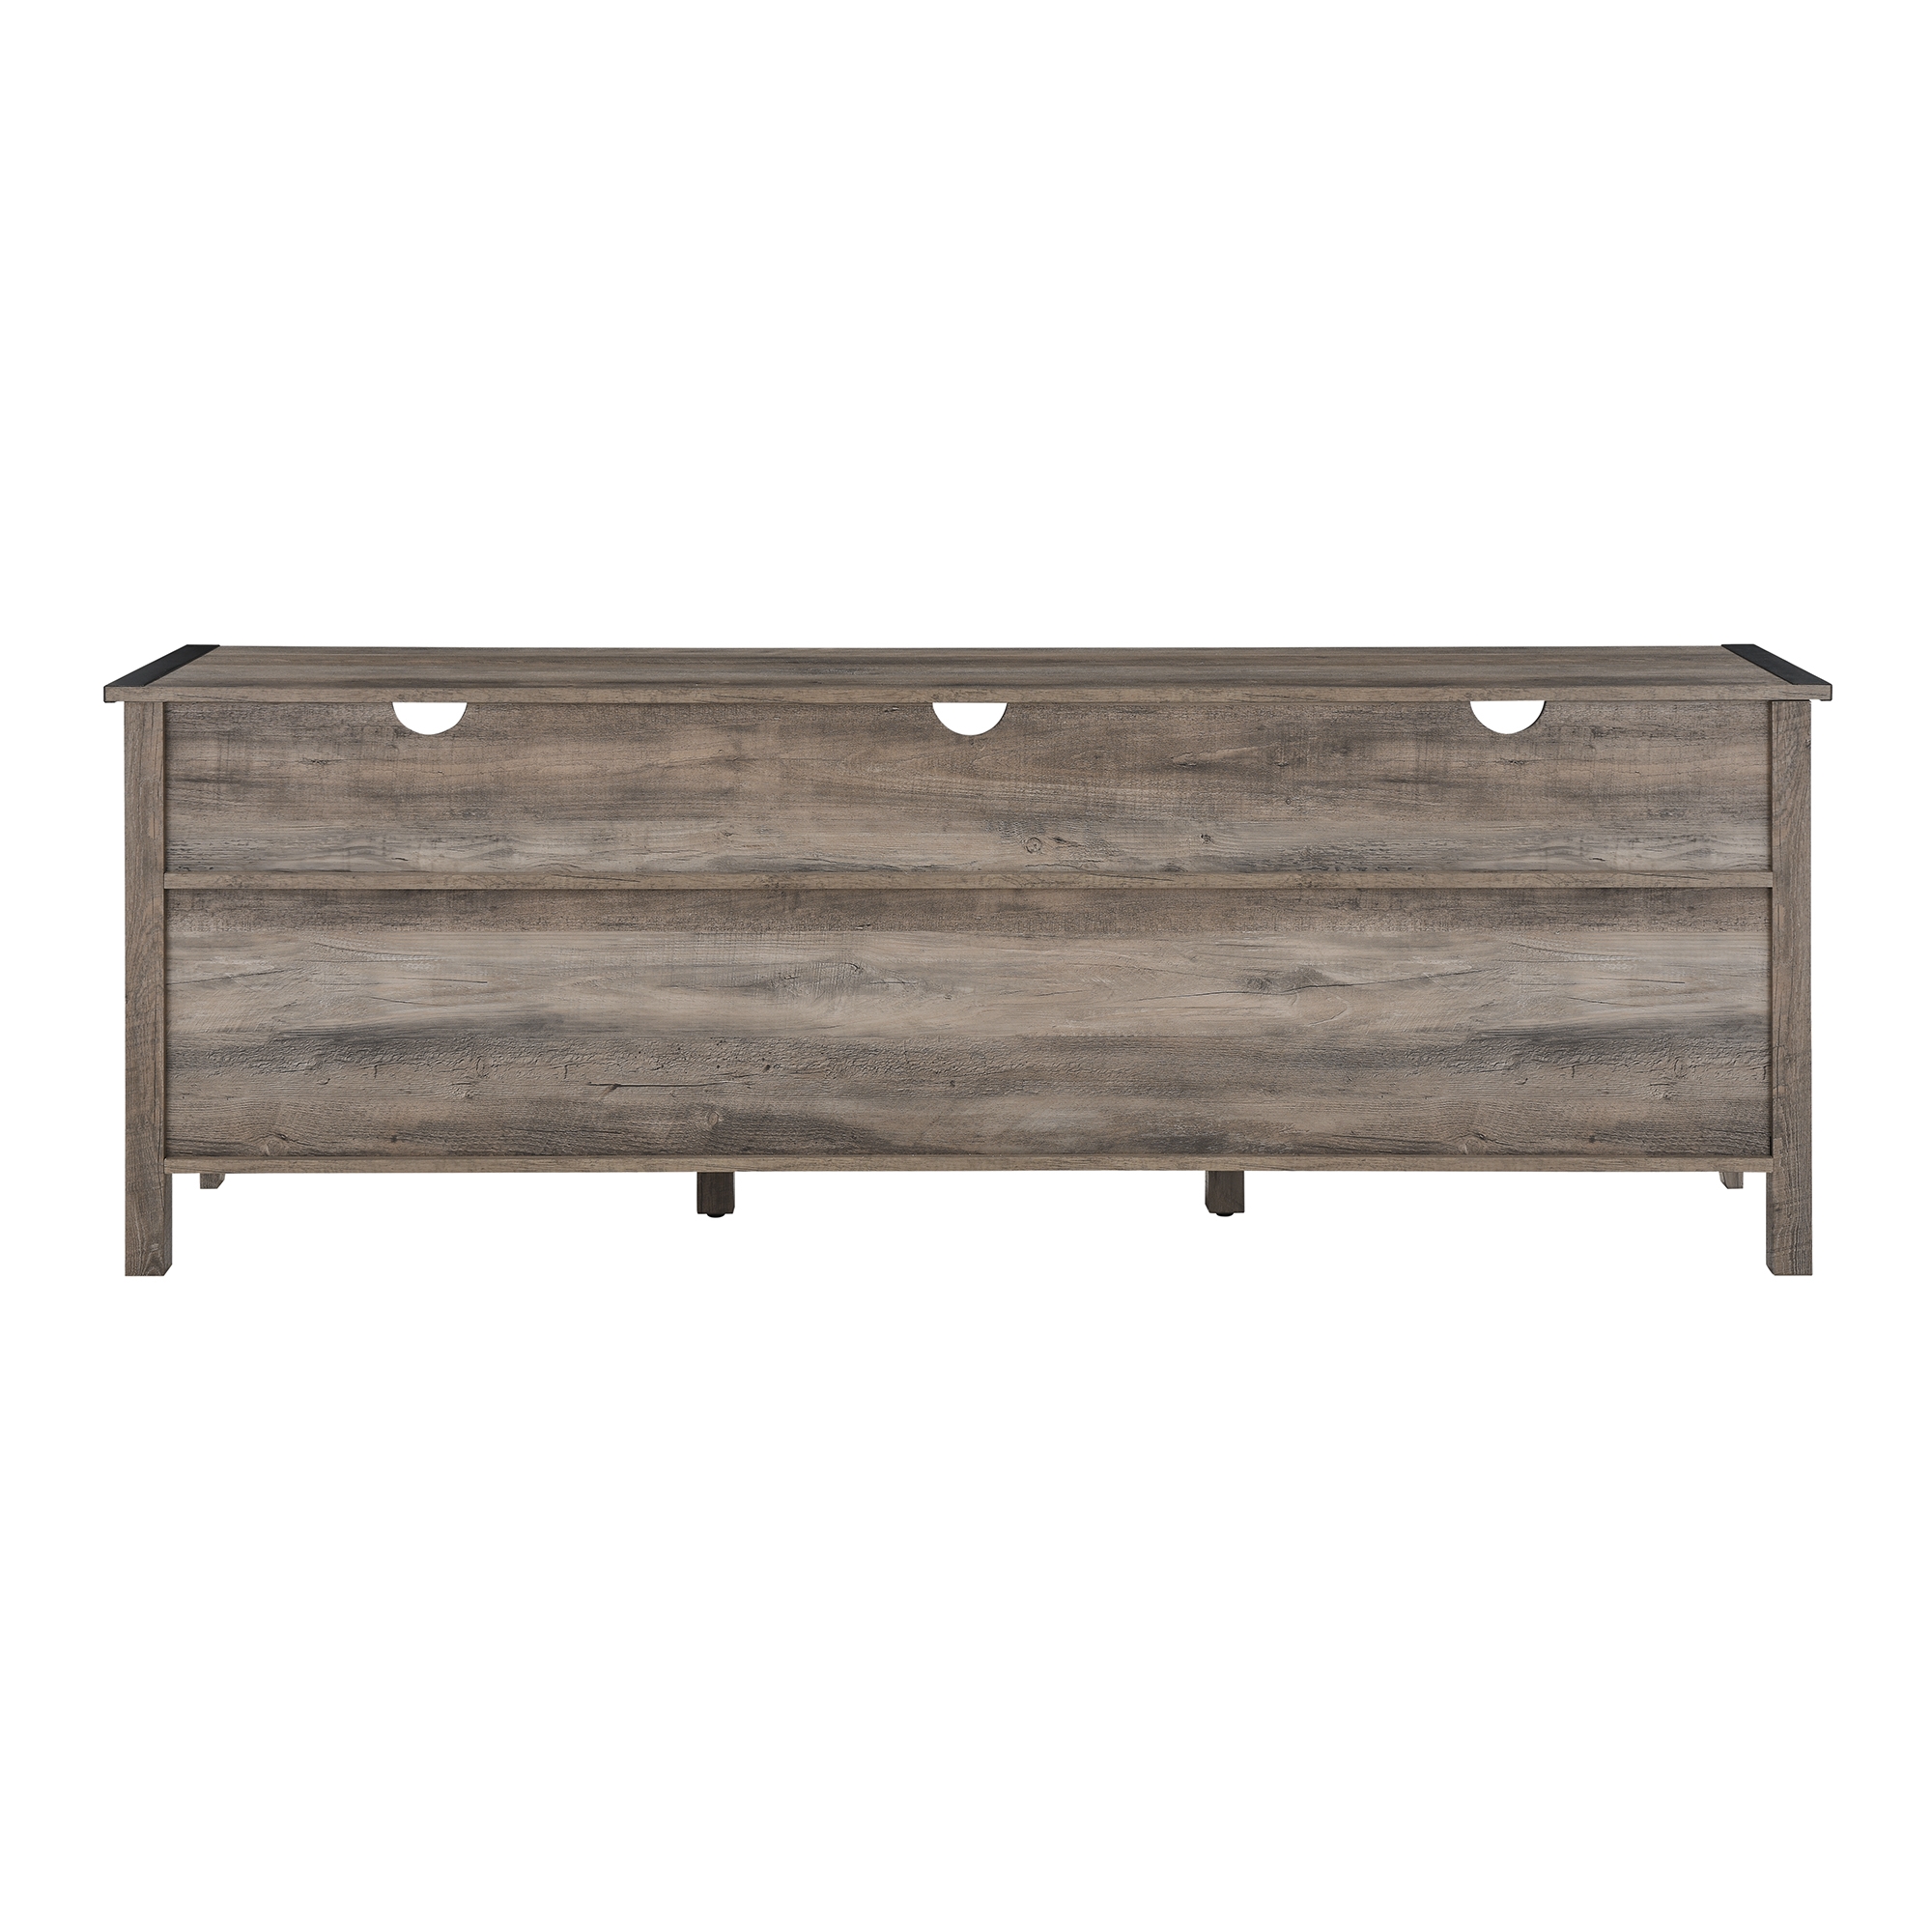 Clair 70" Industrial Farmhouse 4-Drawer TV Stand - Grey Wash - Image 3